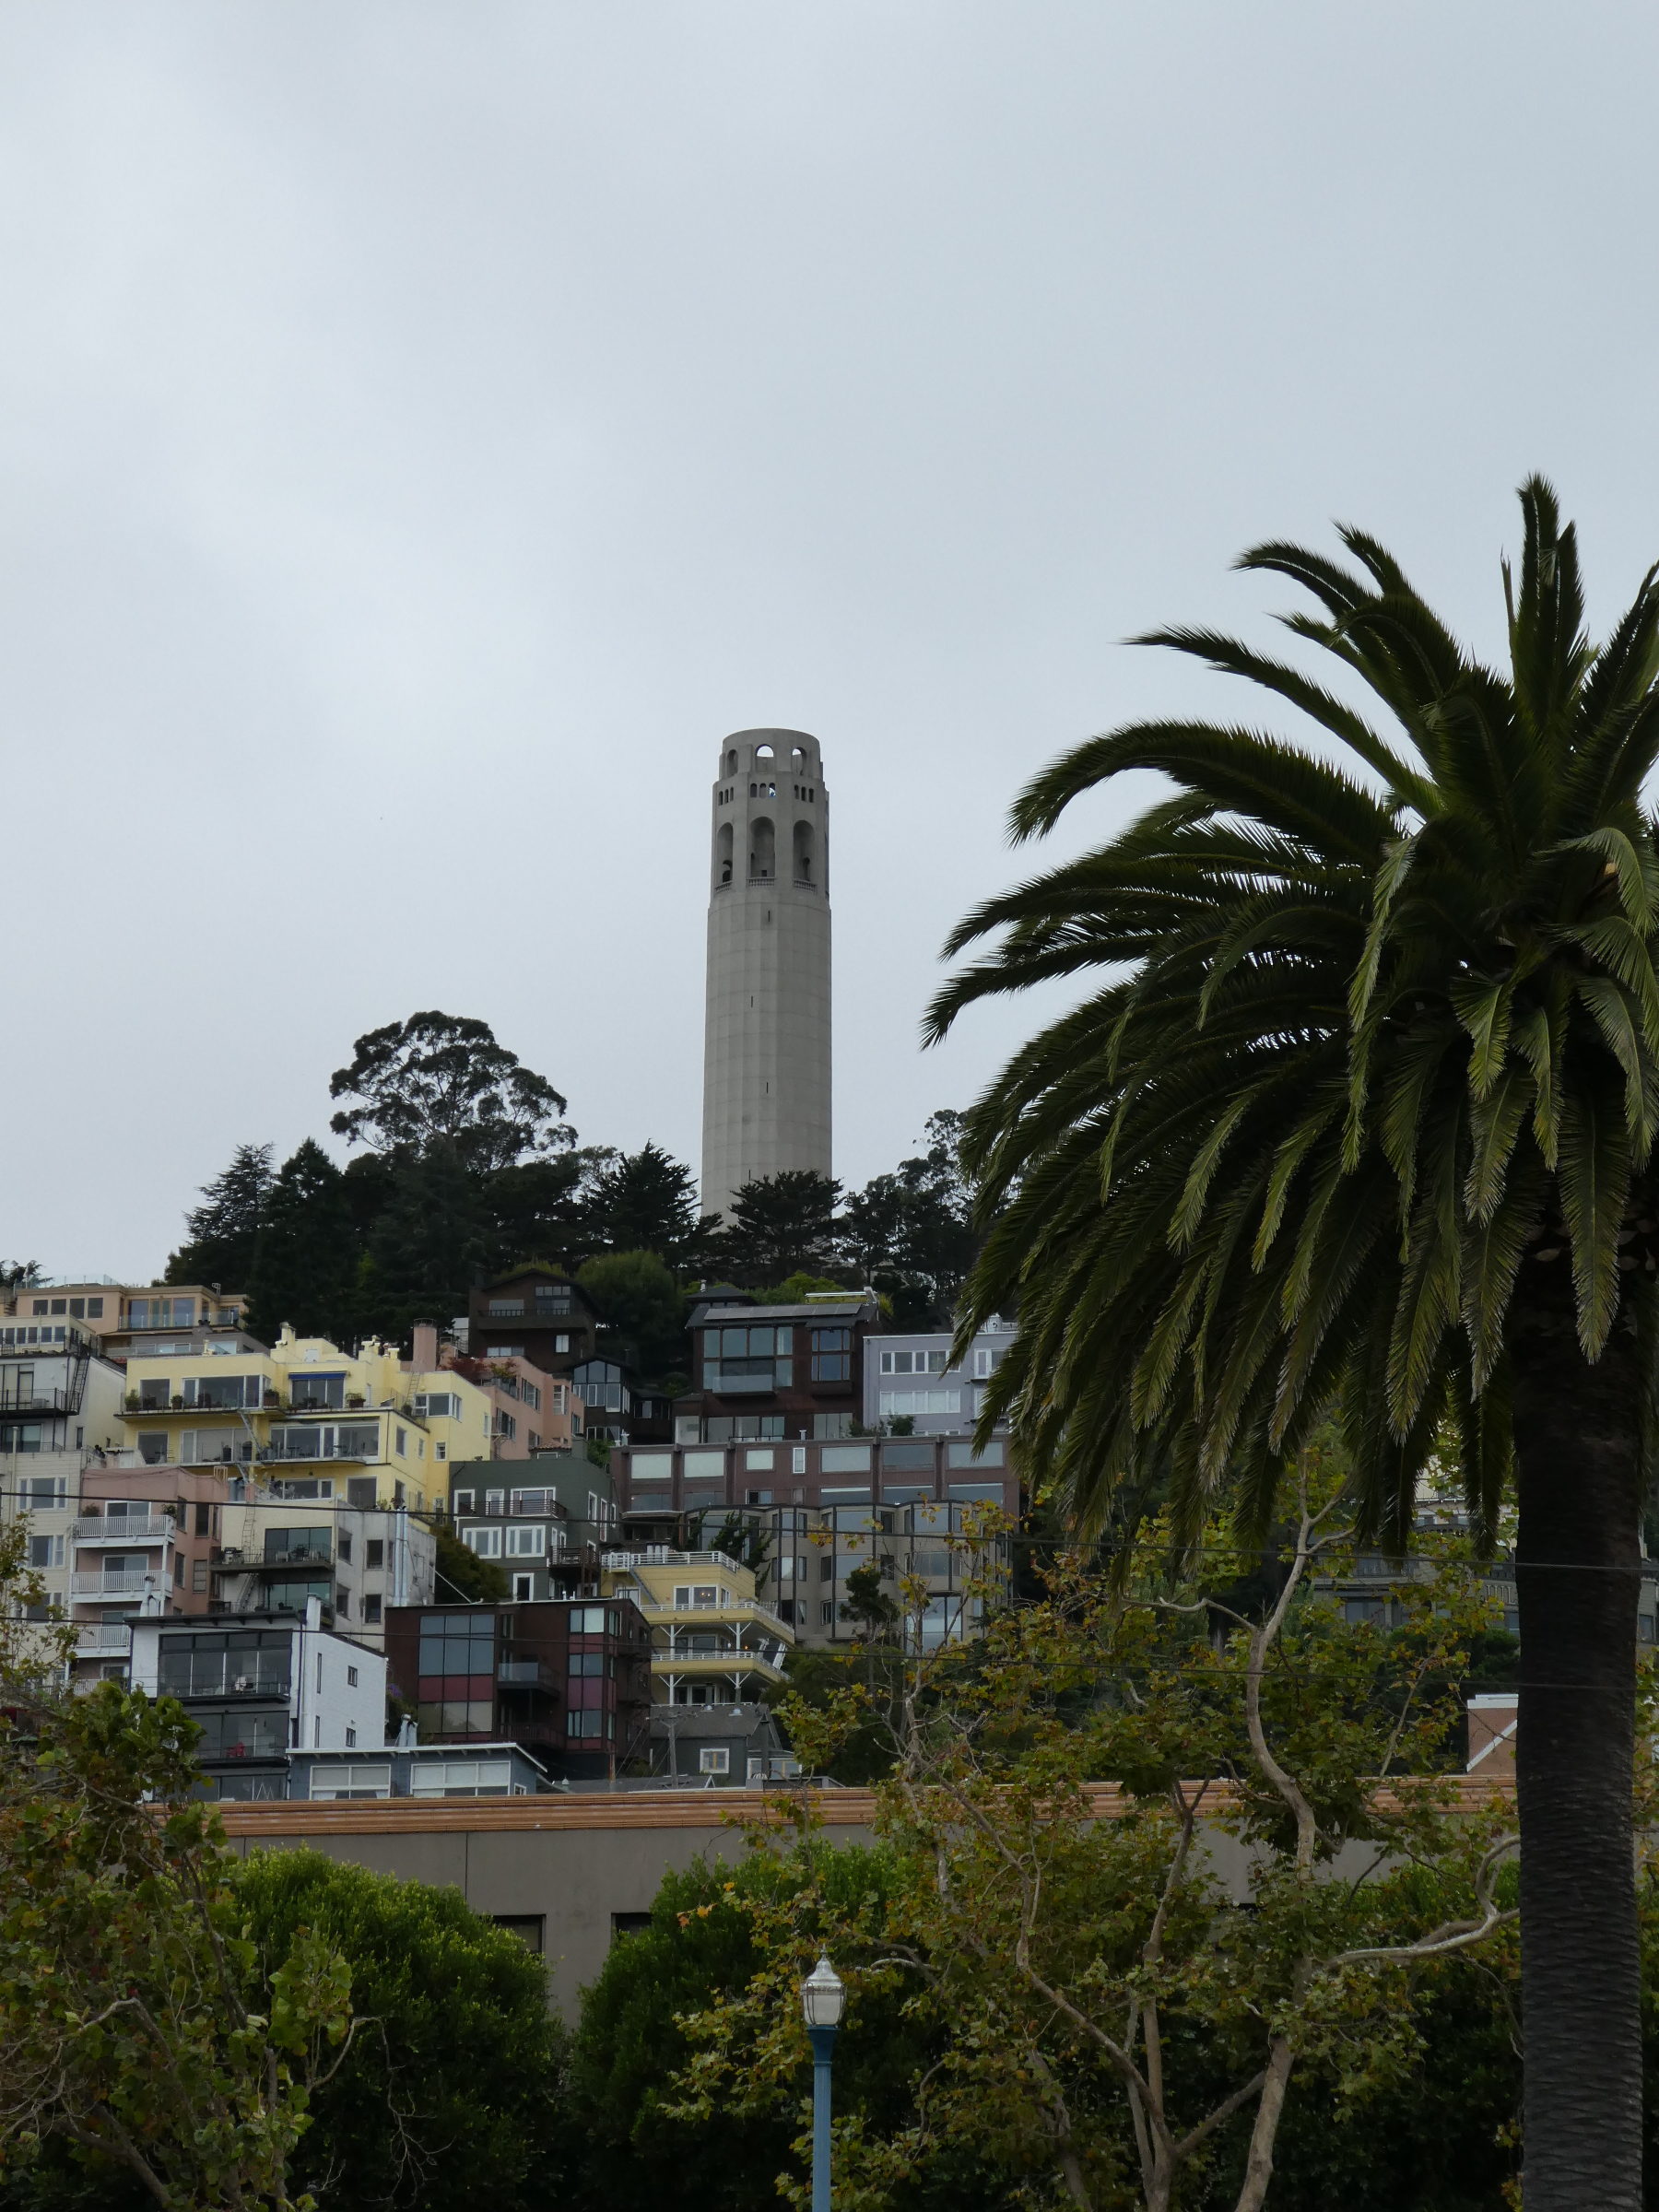 Coit Tower in San Francisco by hesaidorshesaid